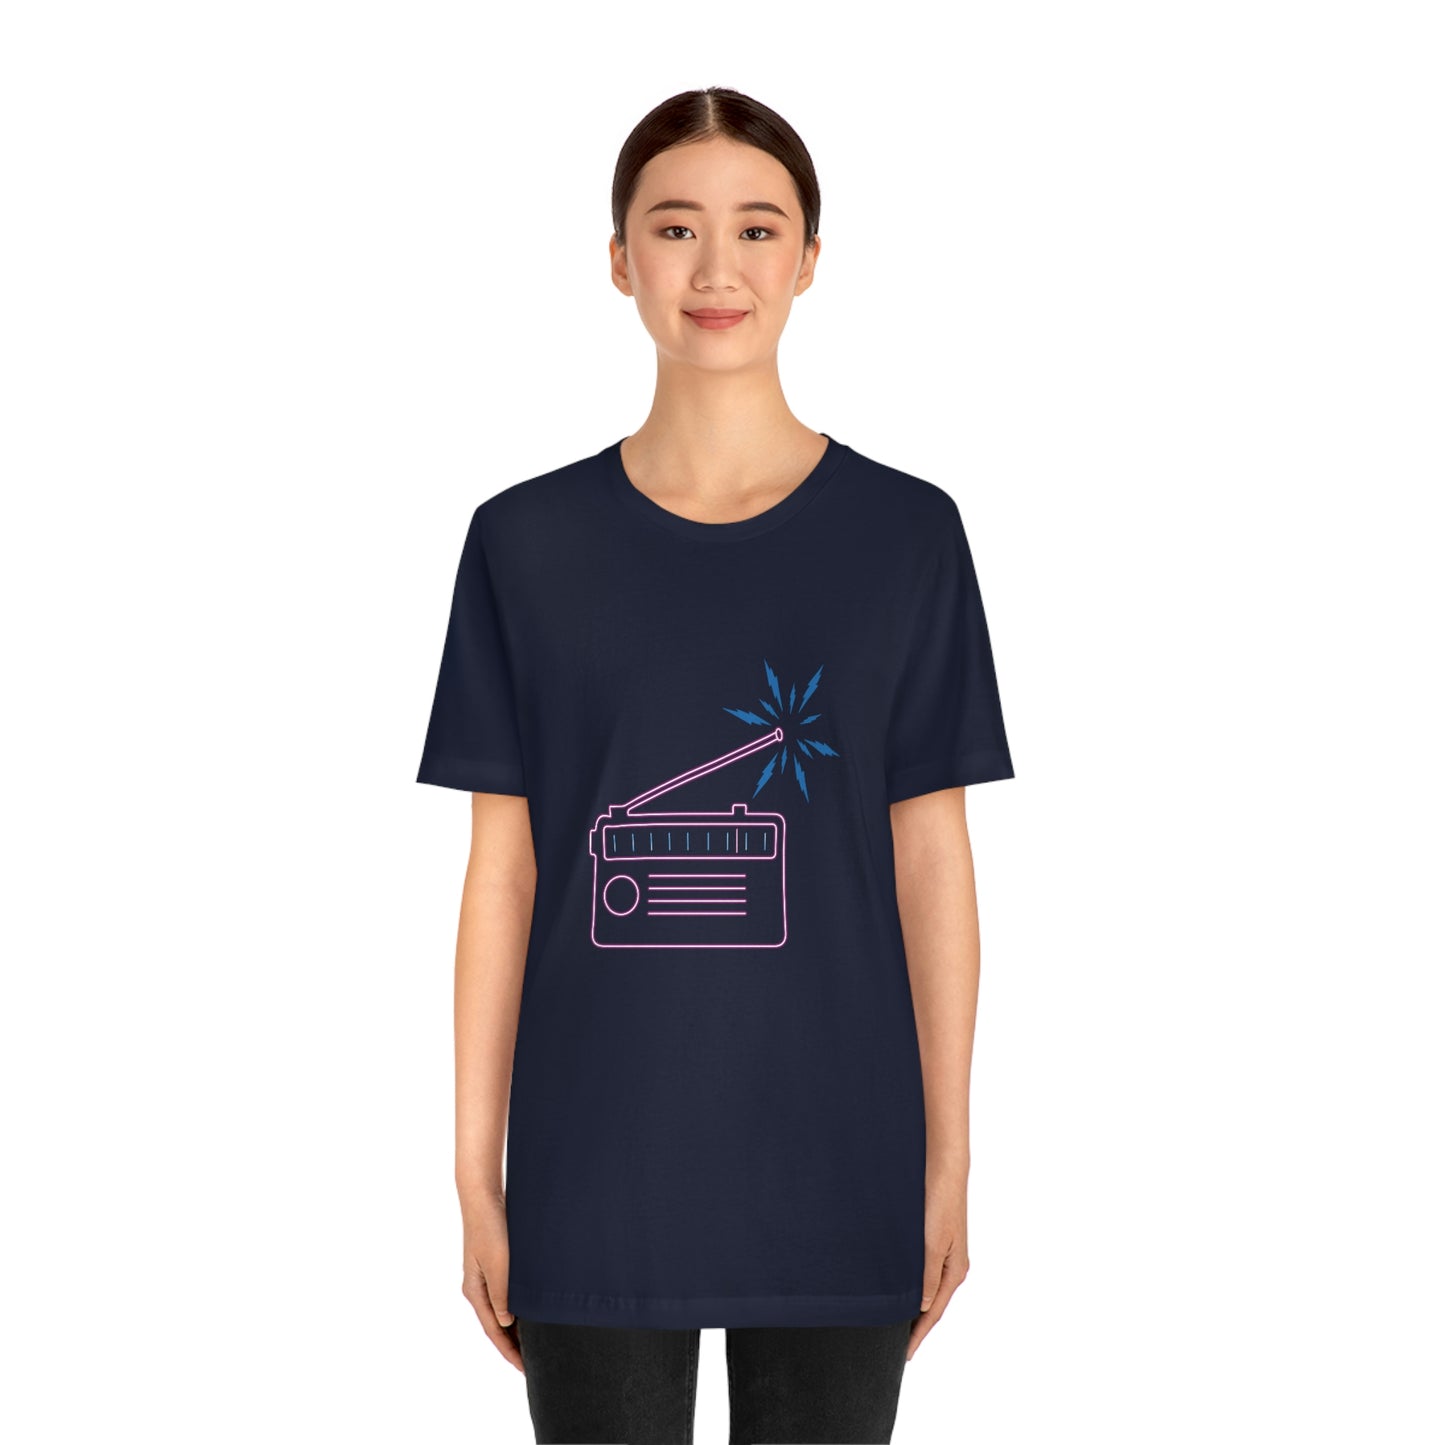 Navy T-Shirt featuring a multi-coloured neon radio design, radiating a vibrant energy. Taken from the TEQNEON Radioactive and Retro Classics collections